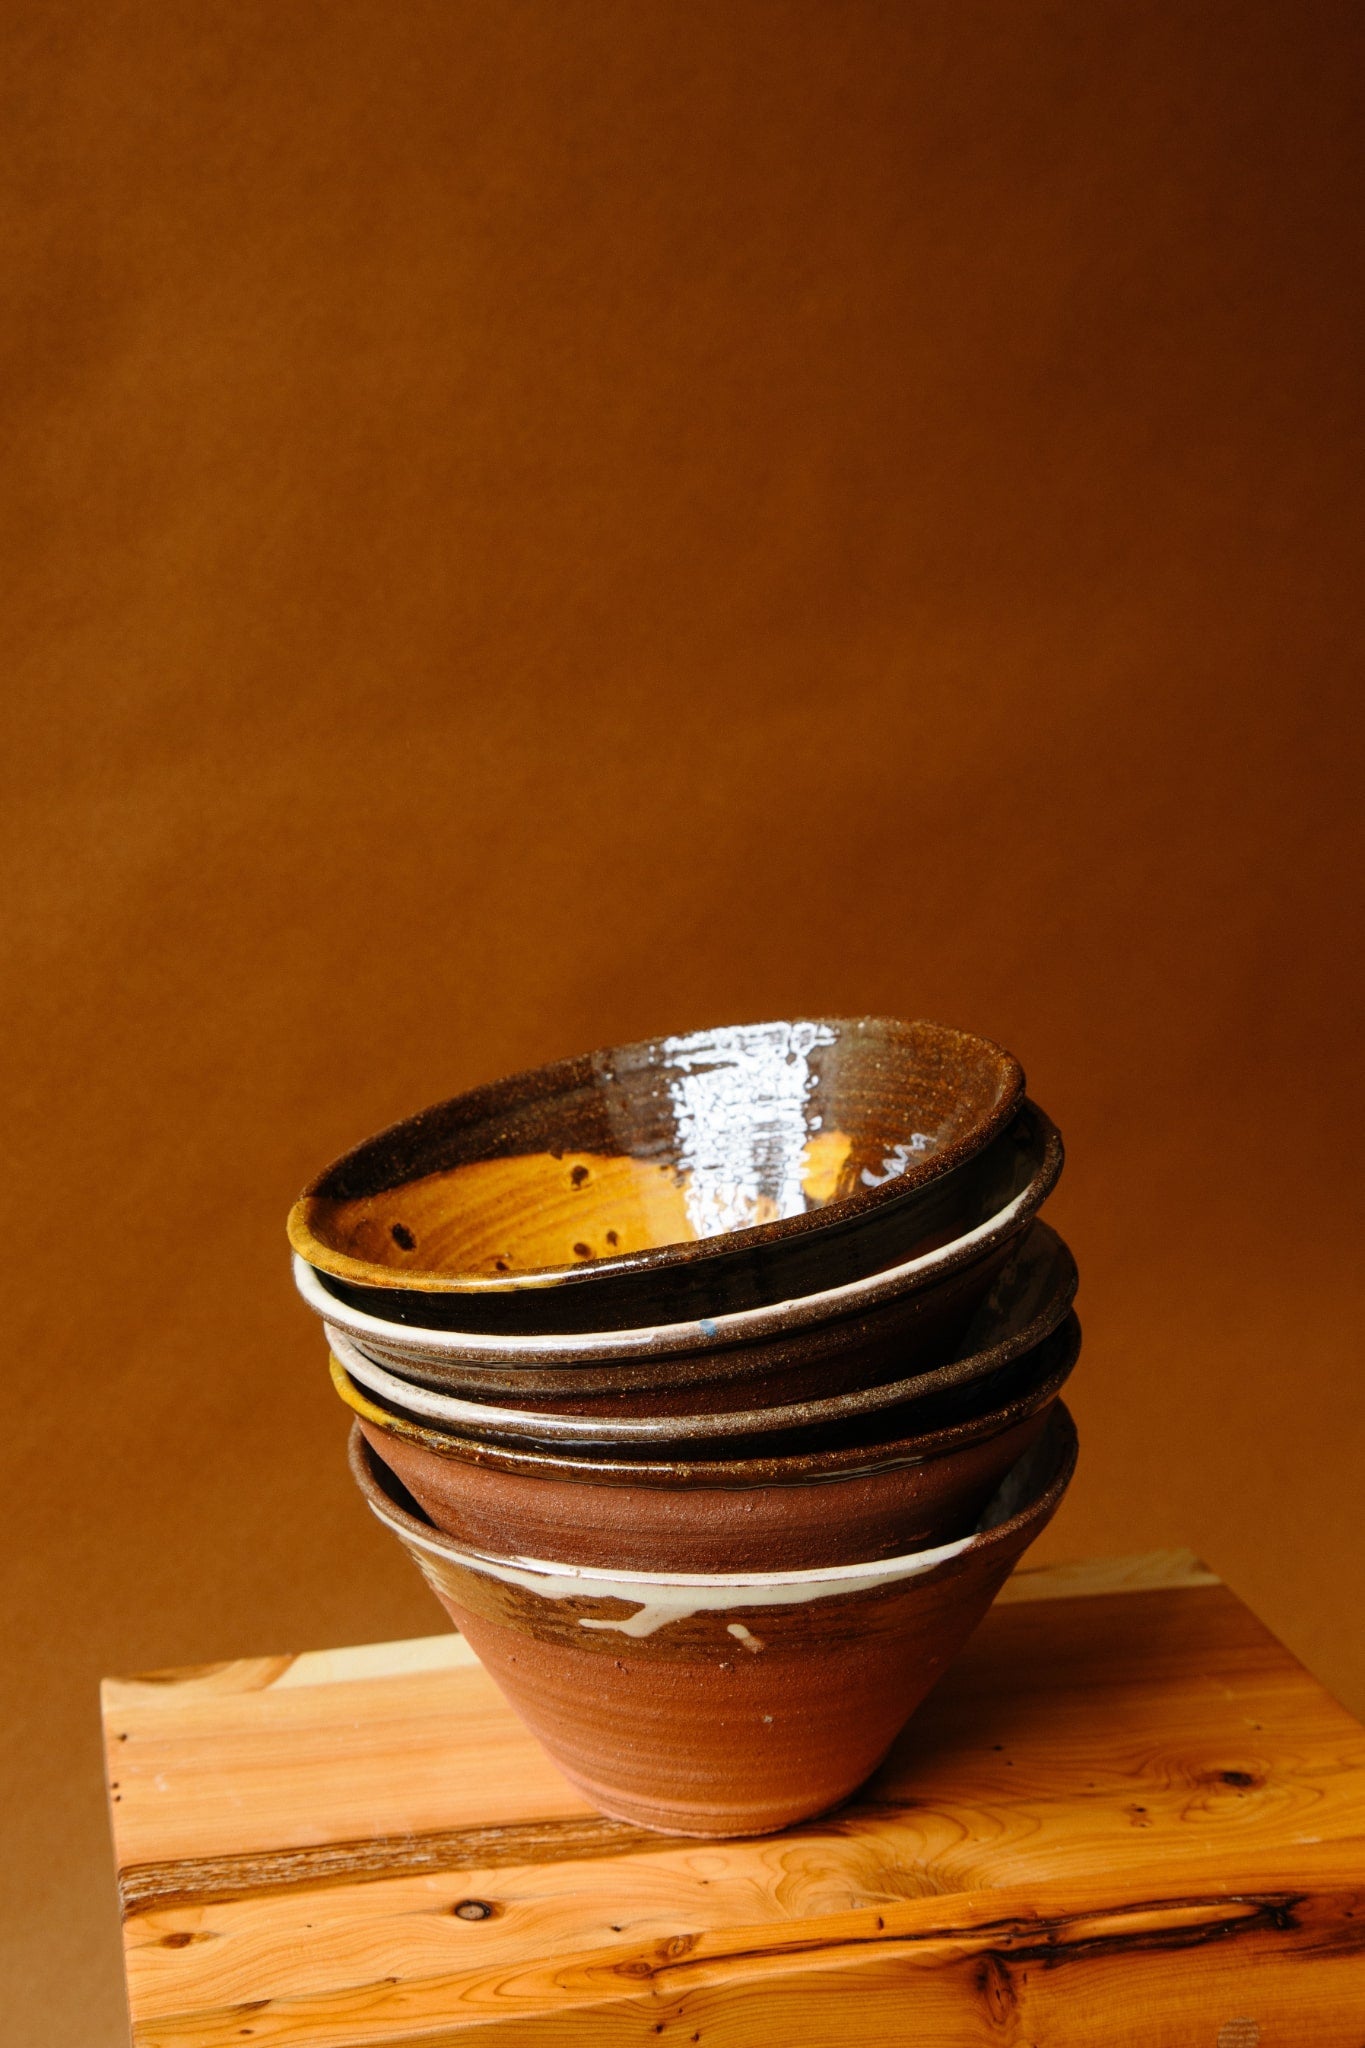 A pile of terracotta bowls against a deep brown paper backdrop. A beautifully uneven application of glaze along the bowls edge is viewable from this side angle.